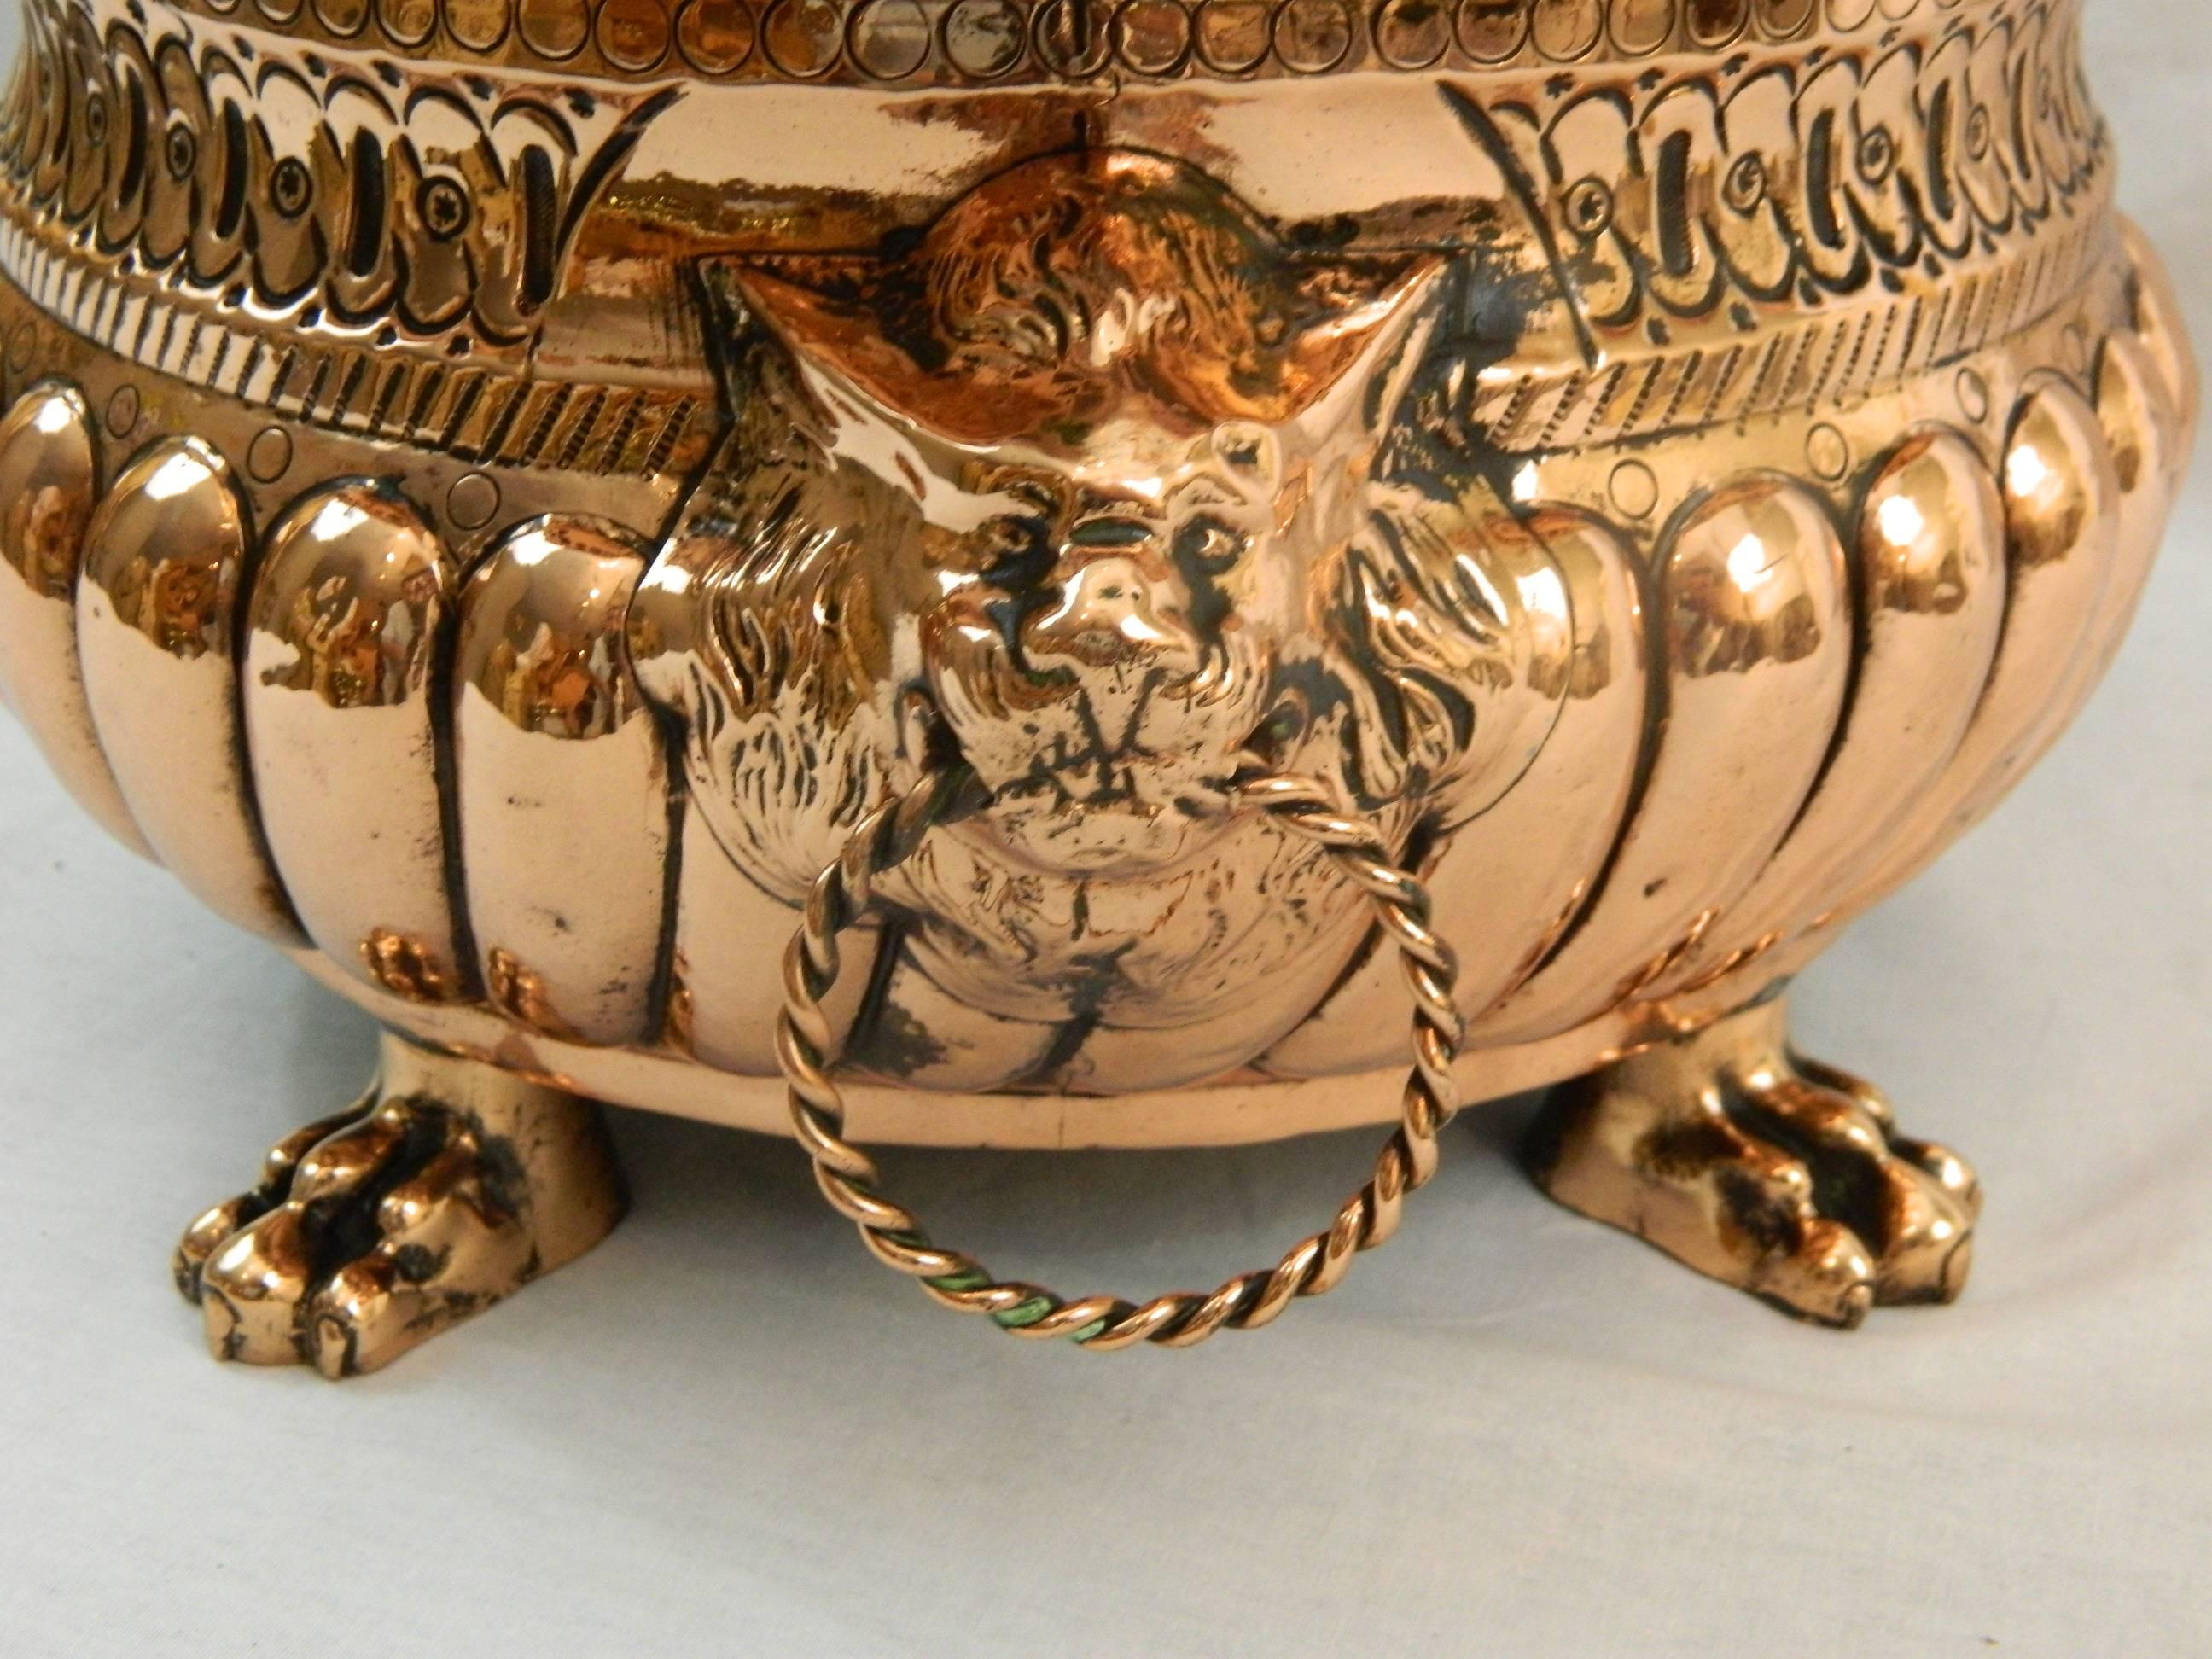 19th century French copper jardiniere or planter with lion handles. 6.5